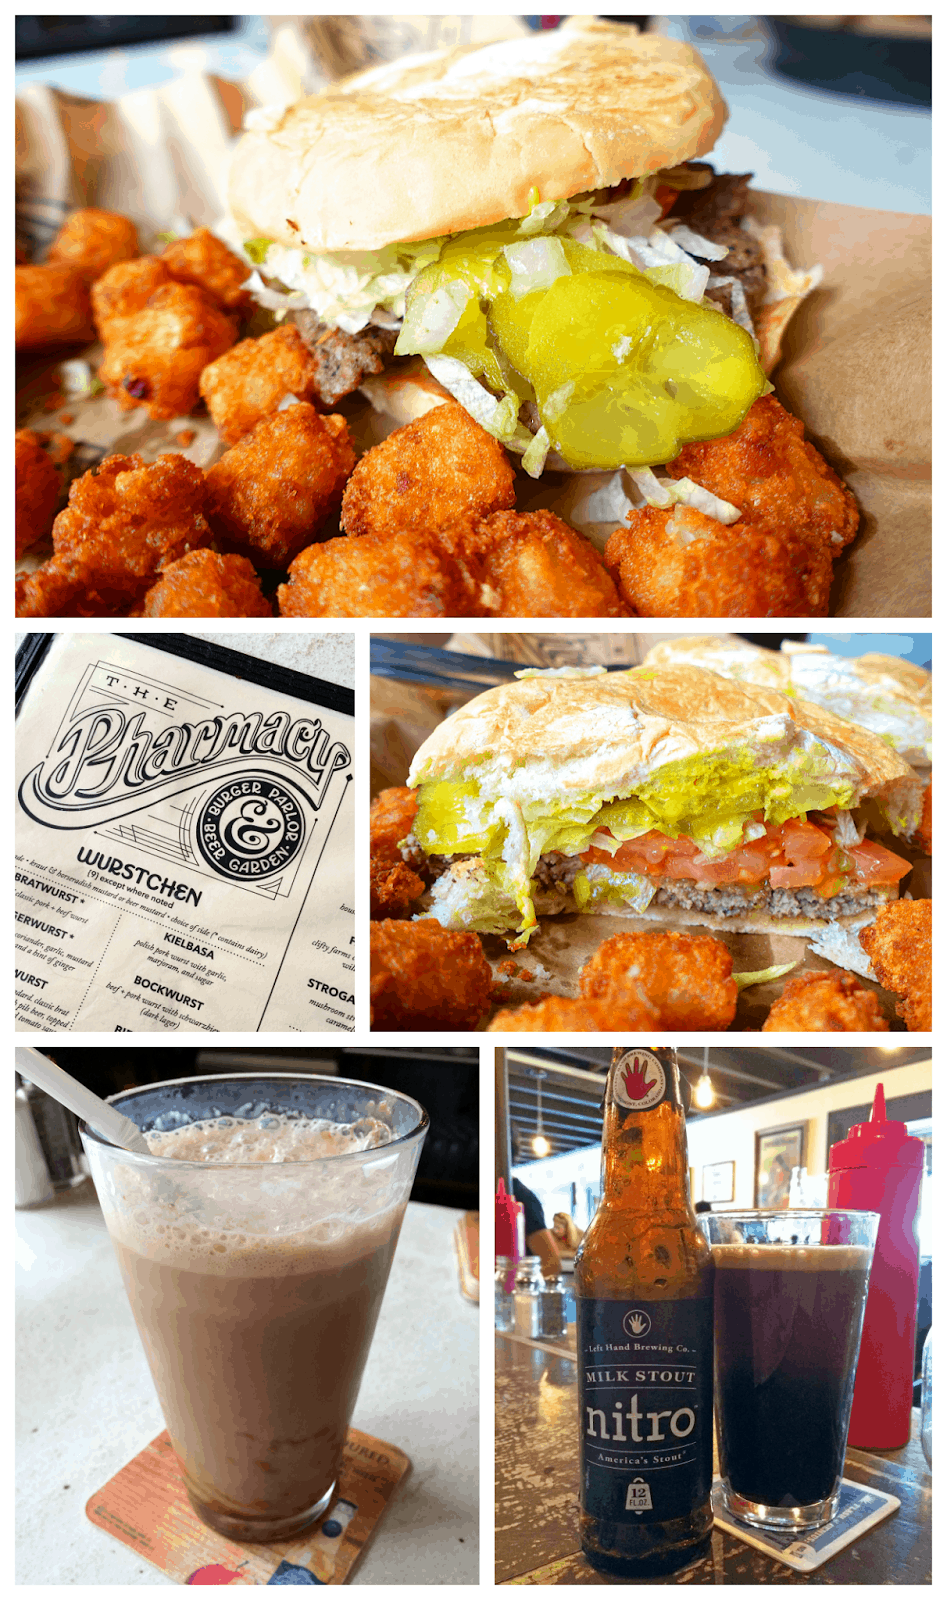 The Pharmacy Burger Parlor and Beer Garden - Nashville, TN - BEST burger in Nashville - hand made burgers, brats and old fashioned sodas. They even make their own condiments! Don't miss the tots! Great beer list. Sit outside in the beirgarten!